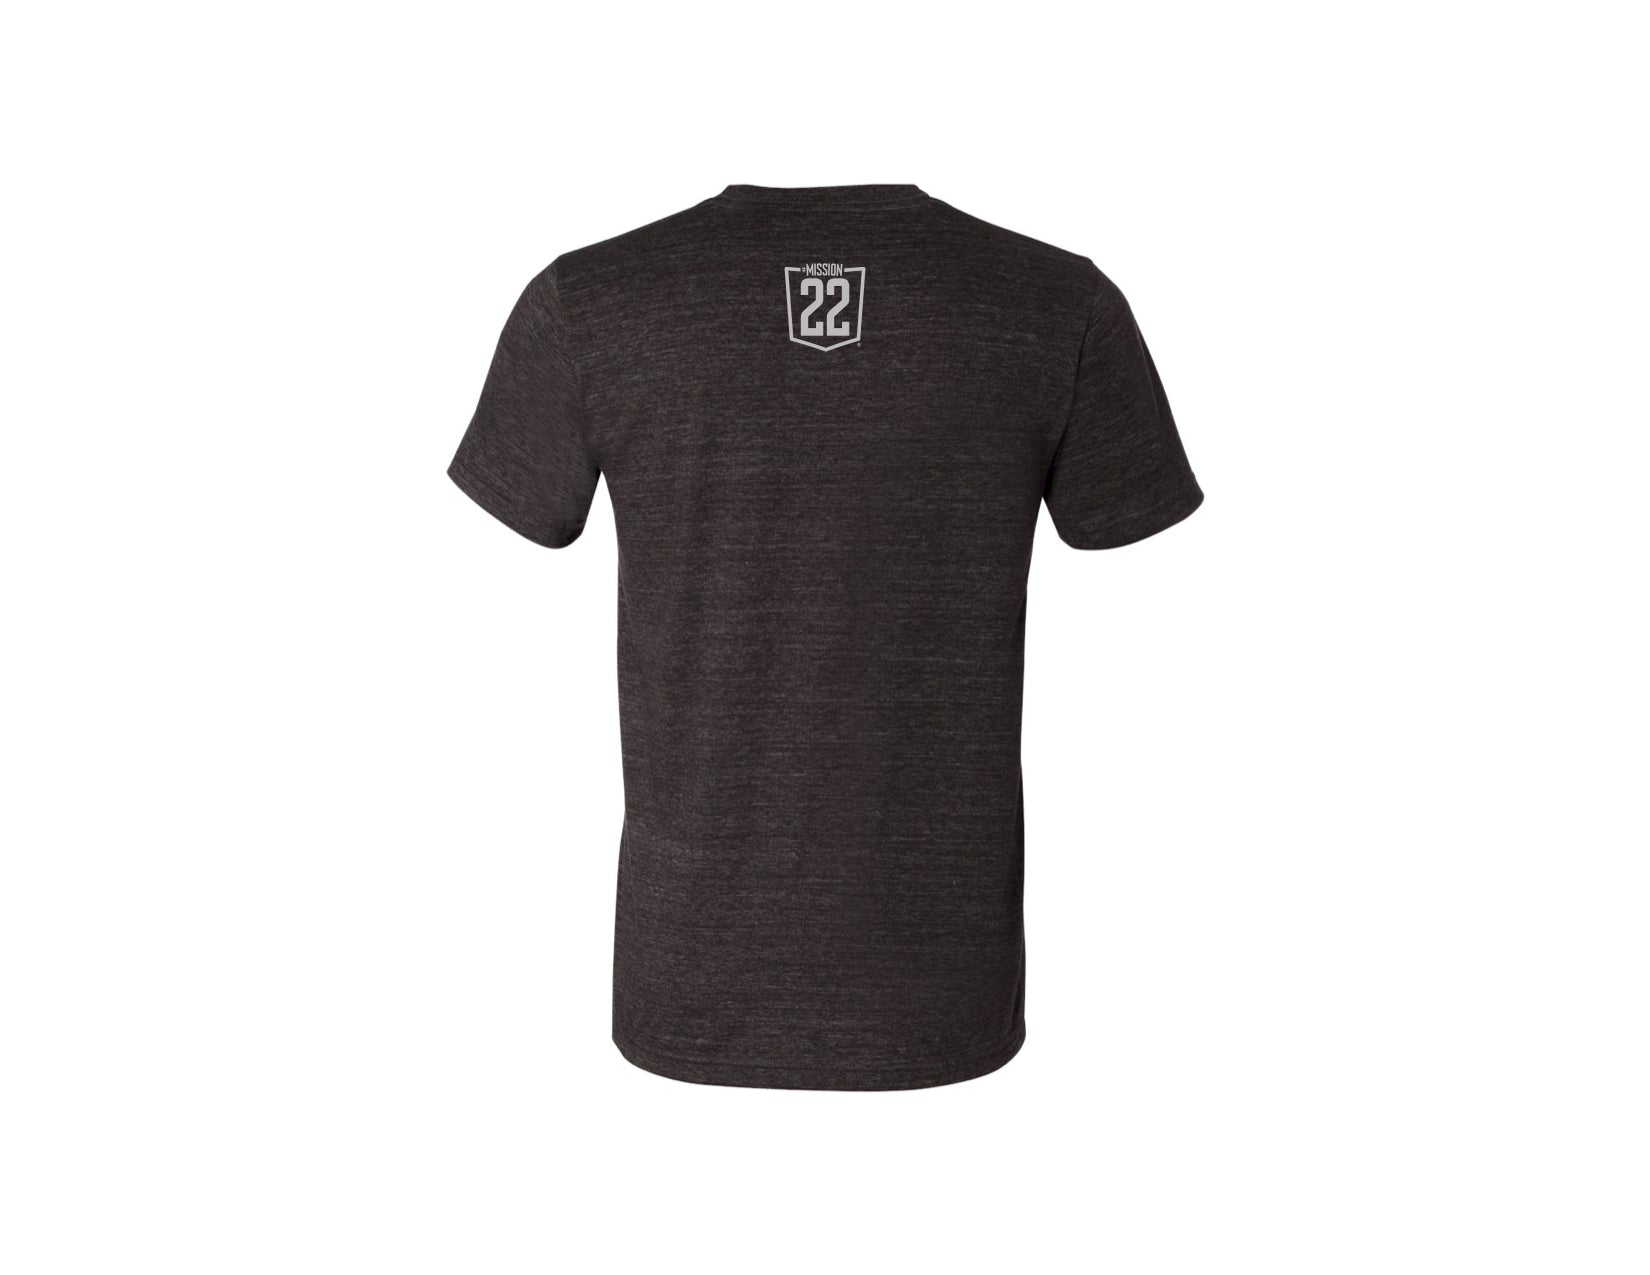 Product Image of Mission 22 Charcoal Tee #2